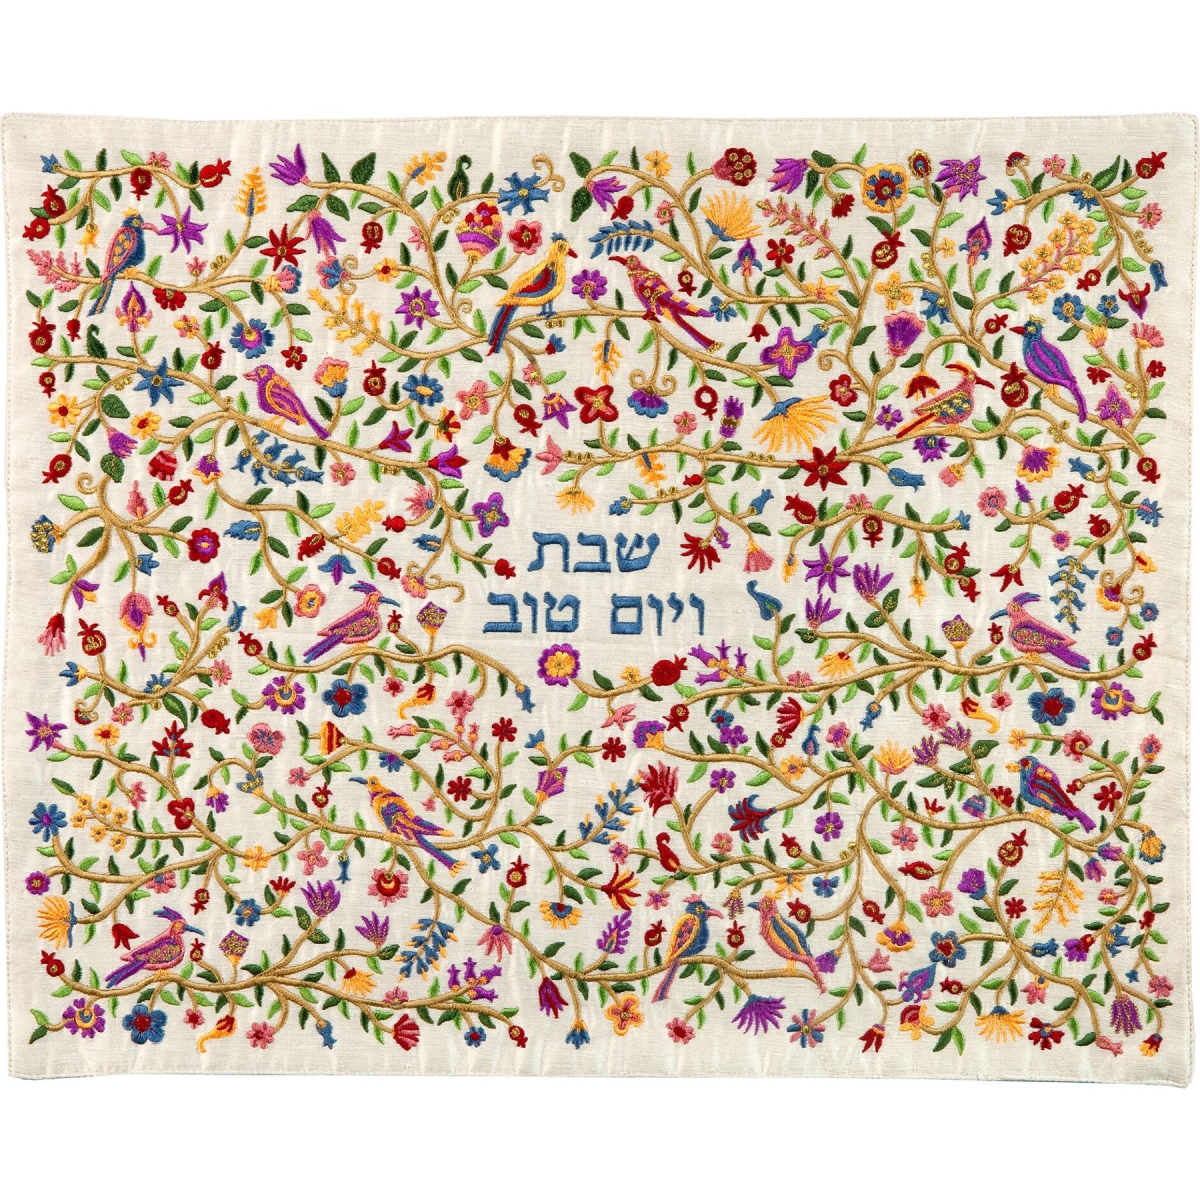 Embroidered Challah Cover - Flowers, Birds And Pomegranates - Variety of Colors - 1